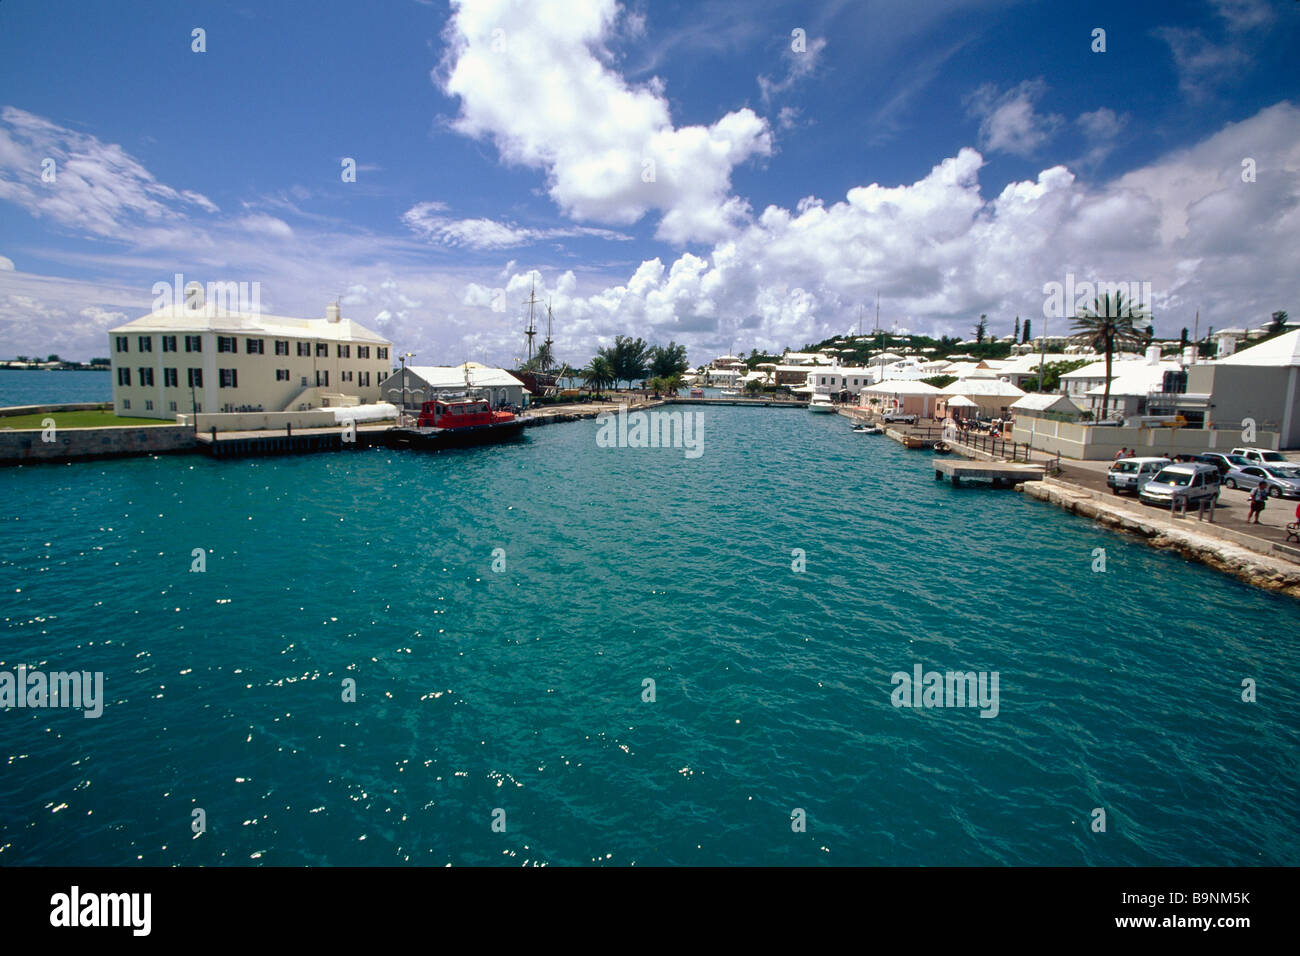 View of a Harbor St George Bermuda Stock Photo